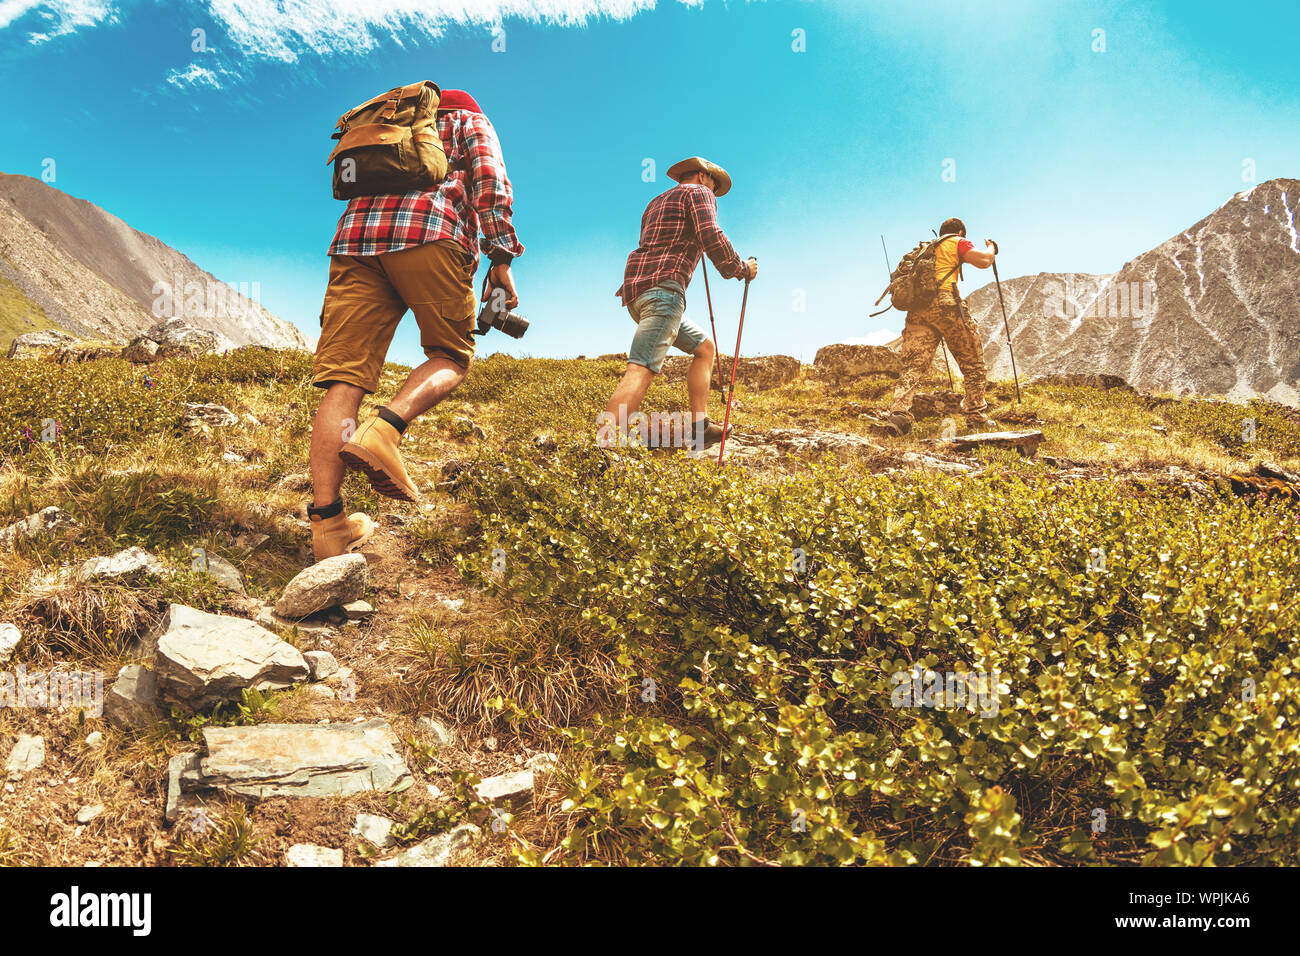 Group of three tourists hikers or friends trekking uphill in mountains Stock Photo